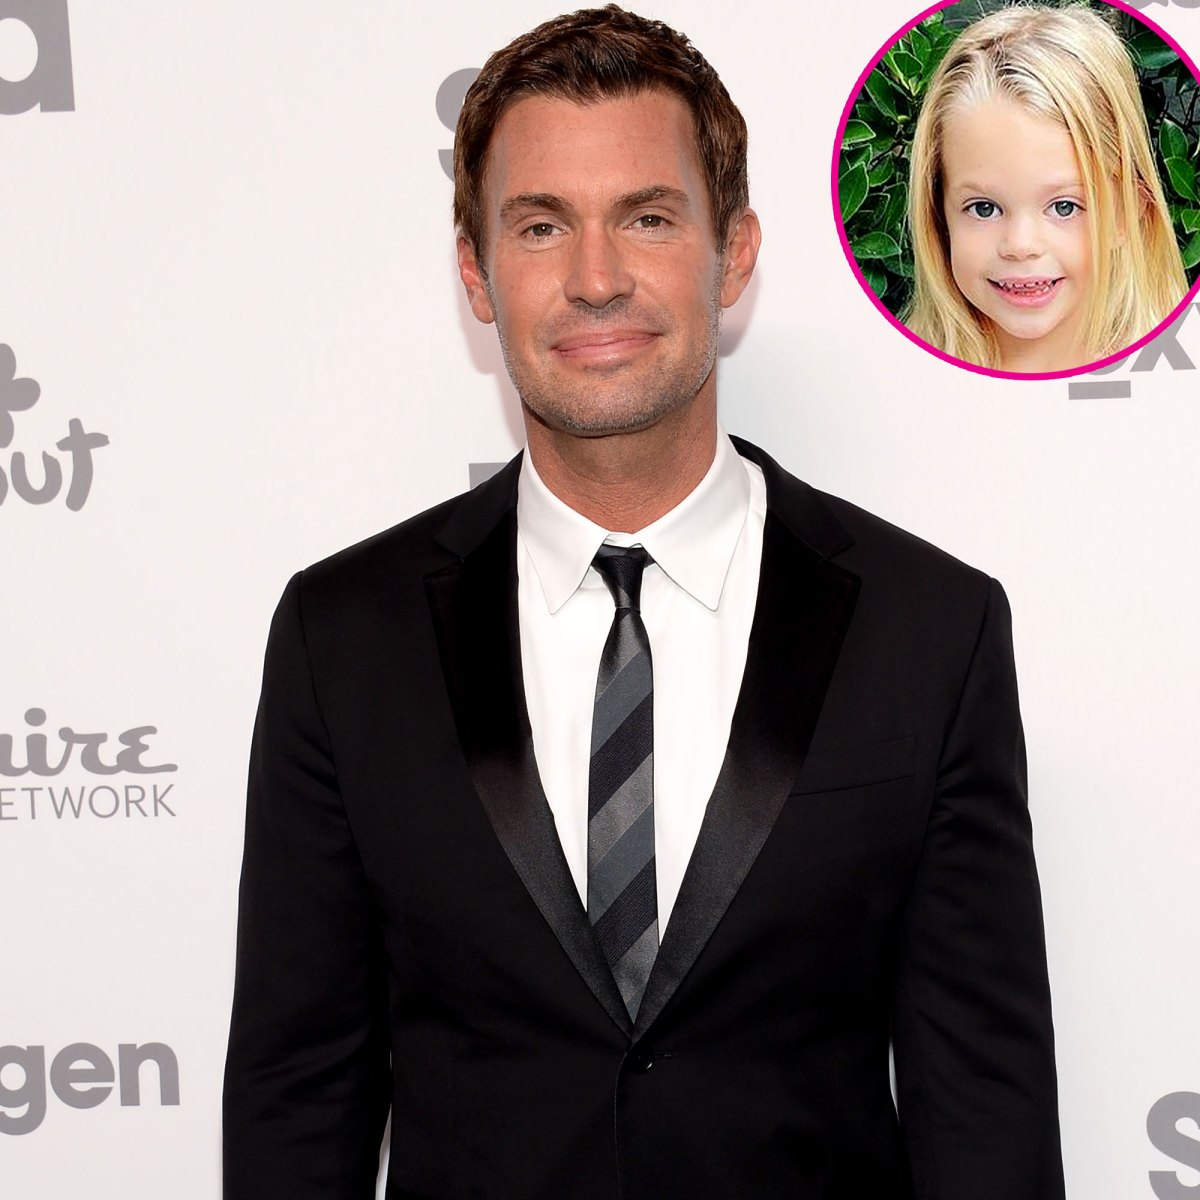 Jeff Lewis 5 Year Old Daughter Monroe Mad He Shared Her School Denial Radio ?w=1200&quality=86&strip=all